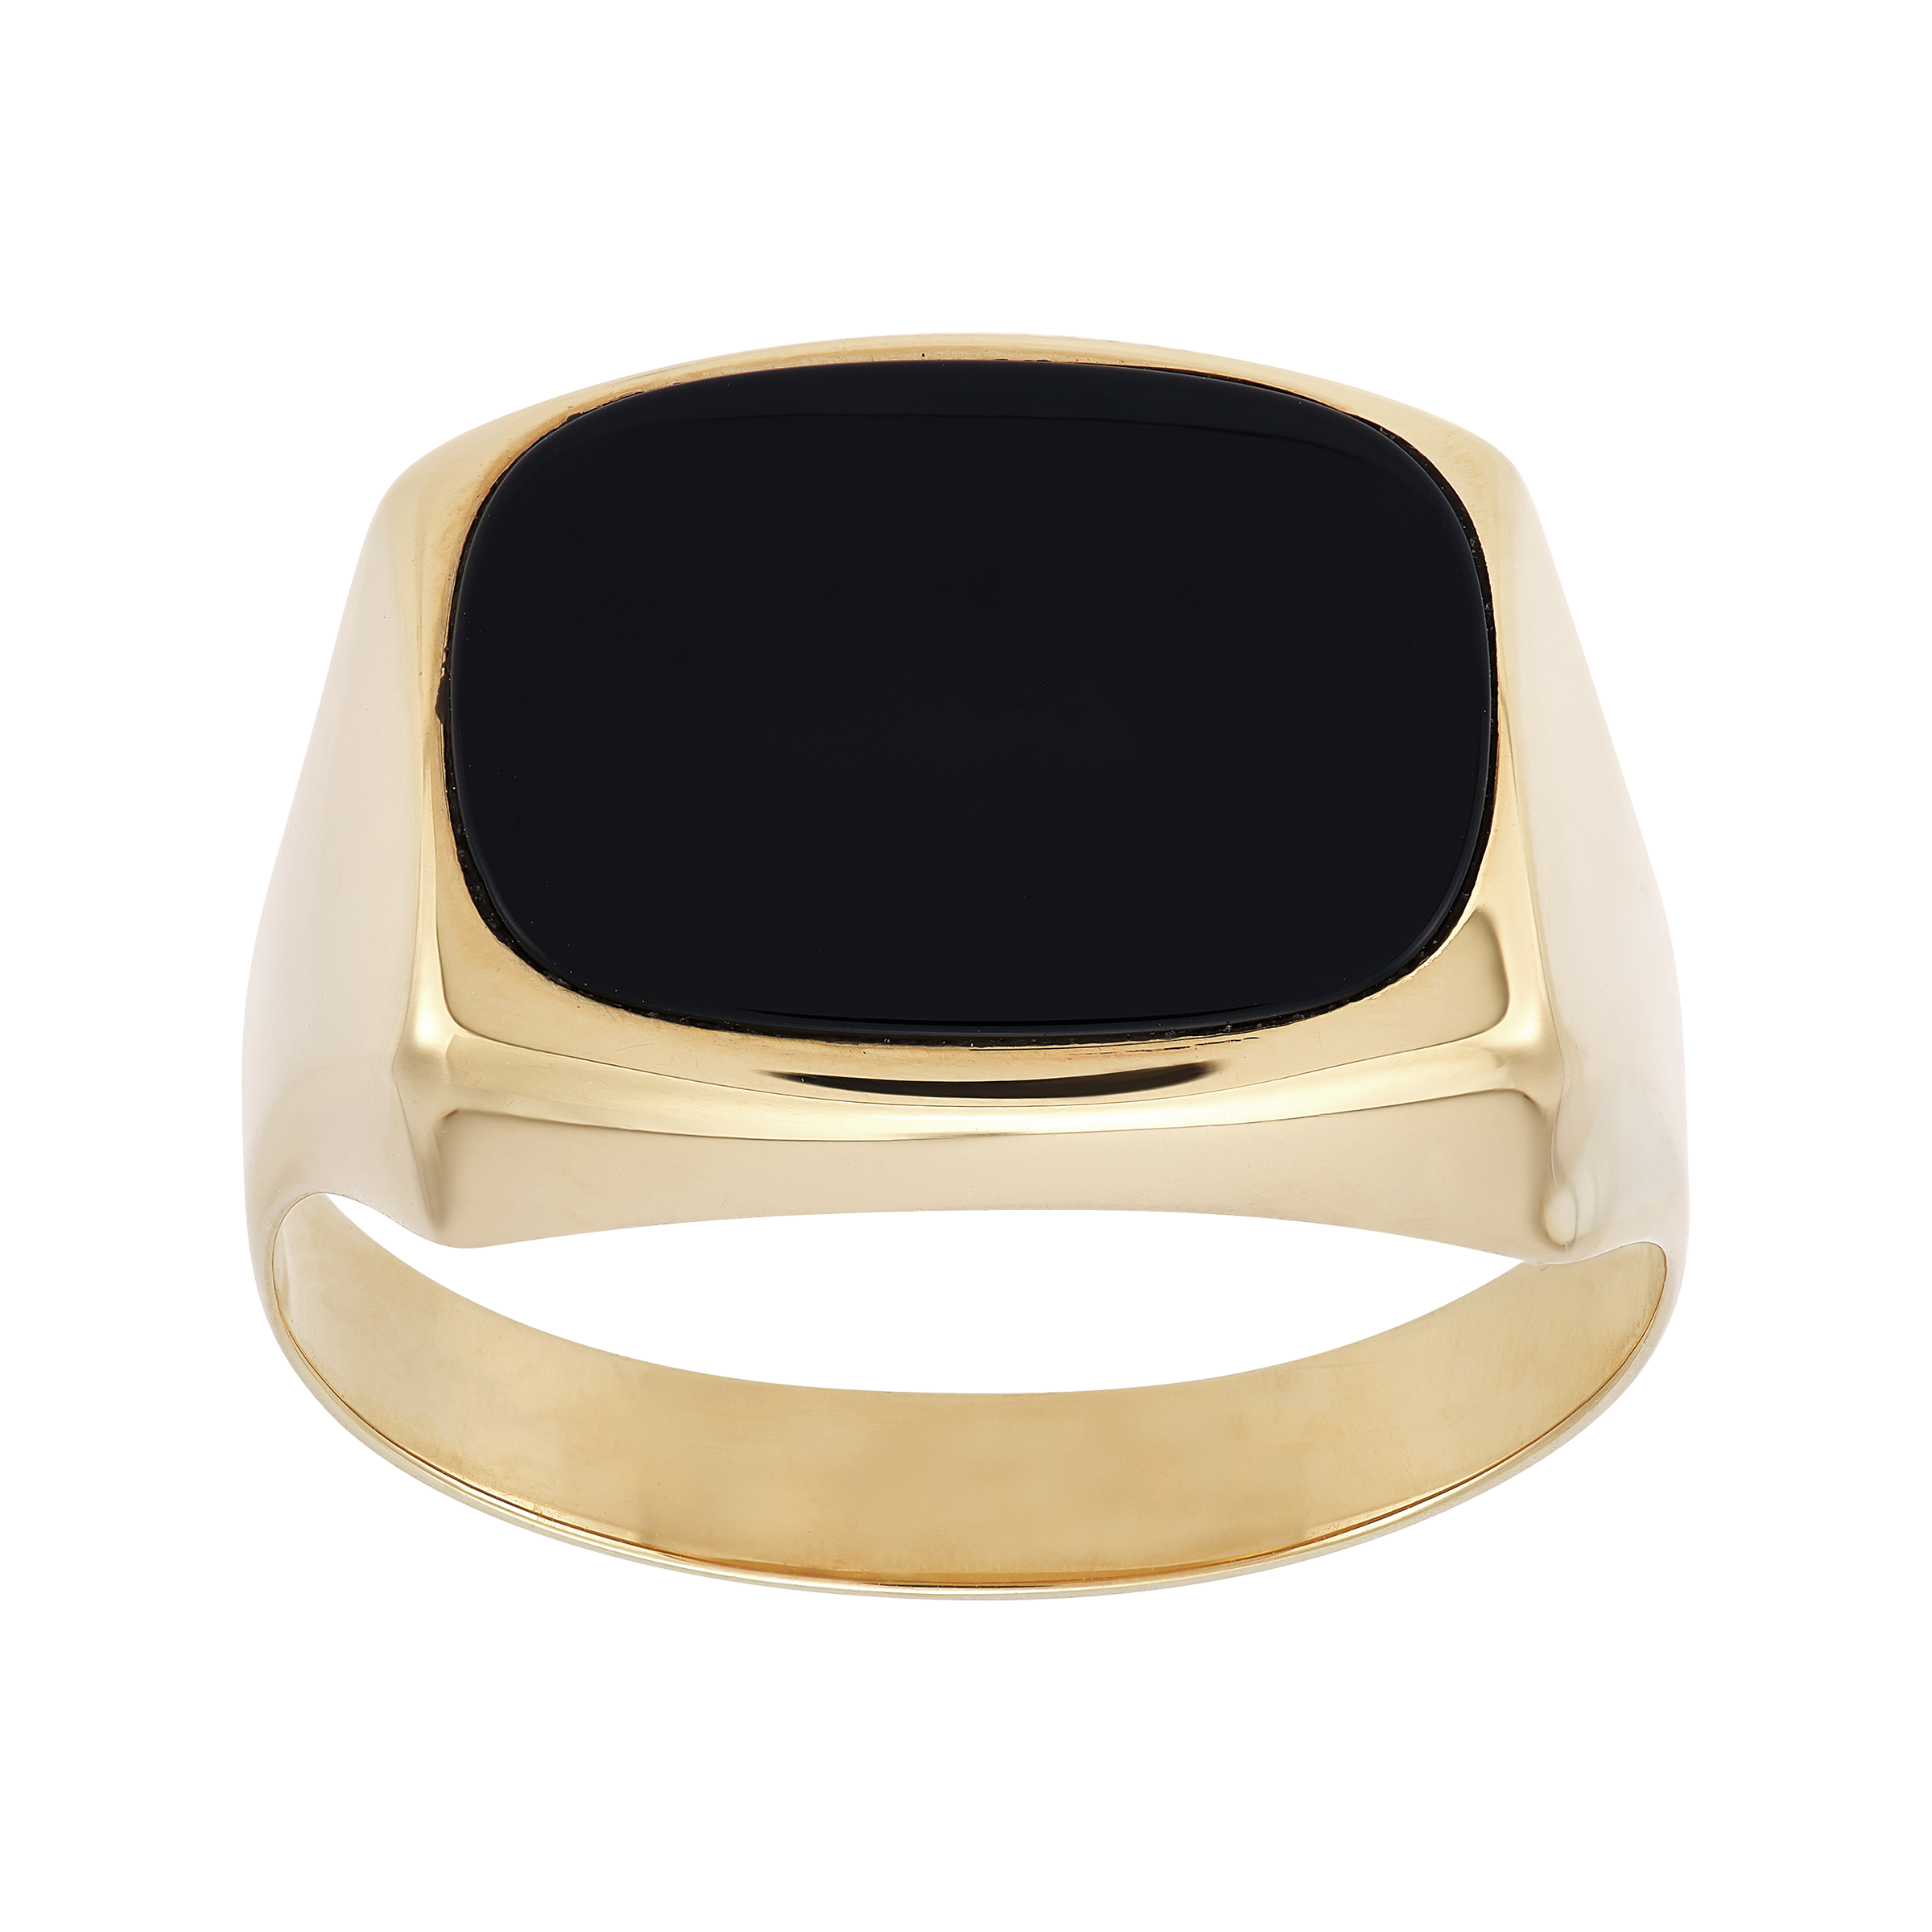 Pre-owned Welry Men's 10k Yellow Gold Signet Ring With Onyx, Size 10 In Black